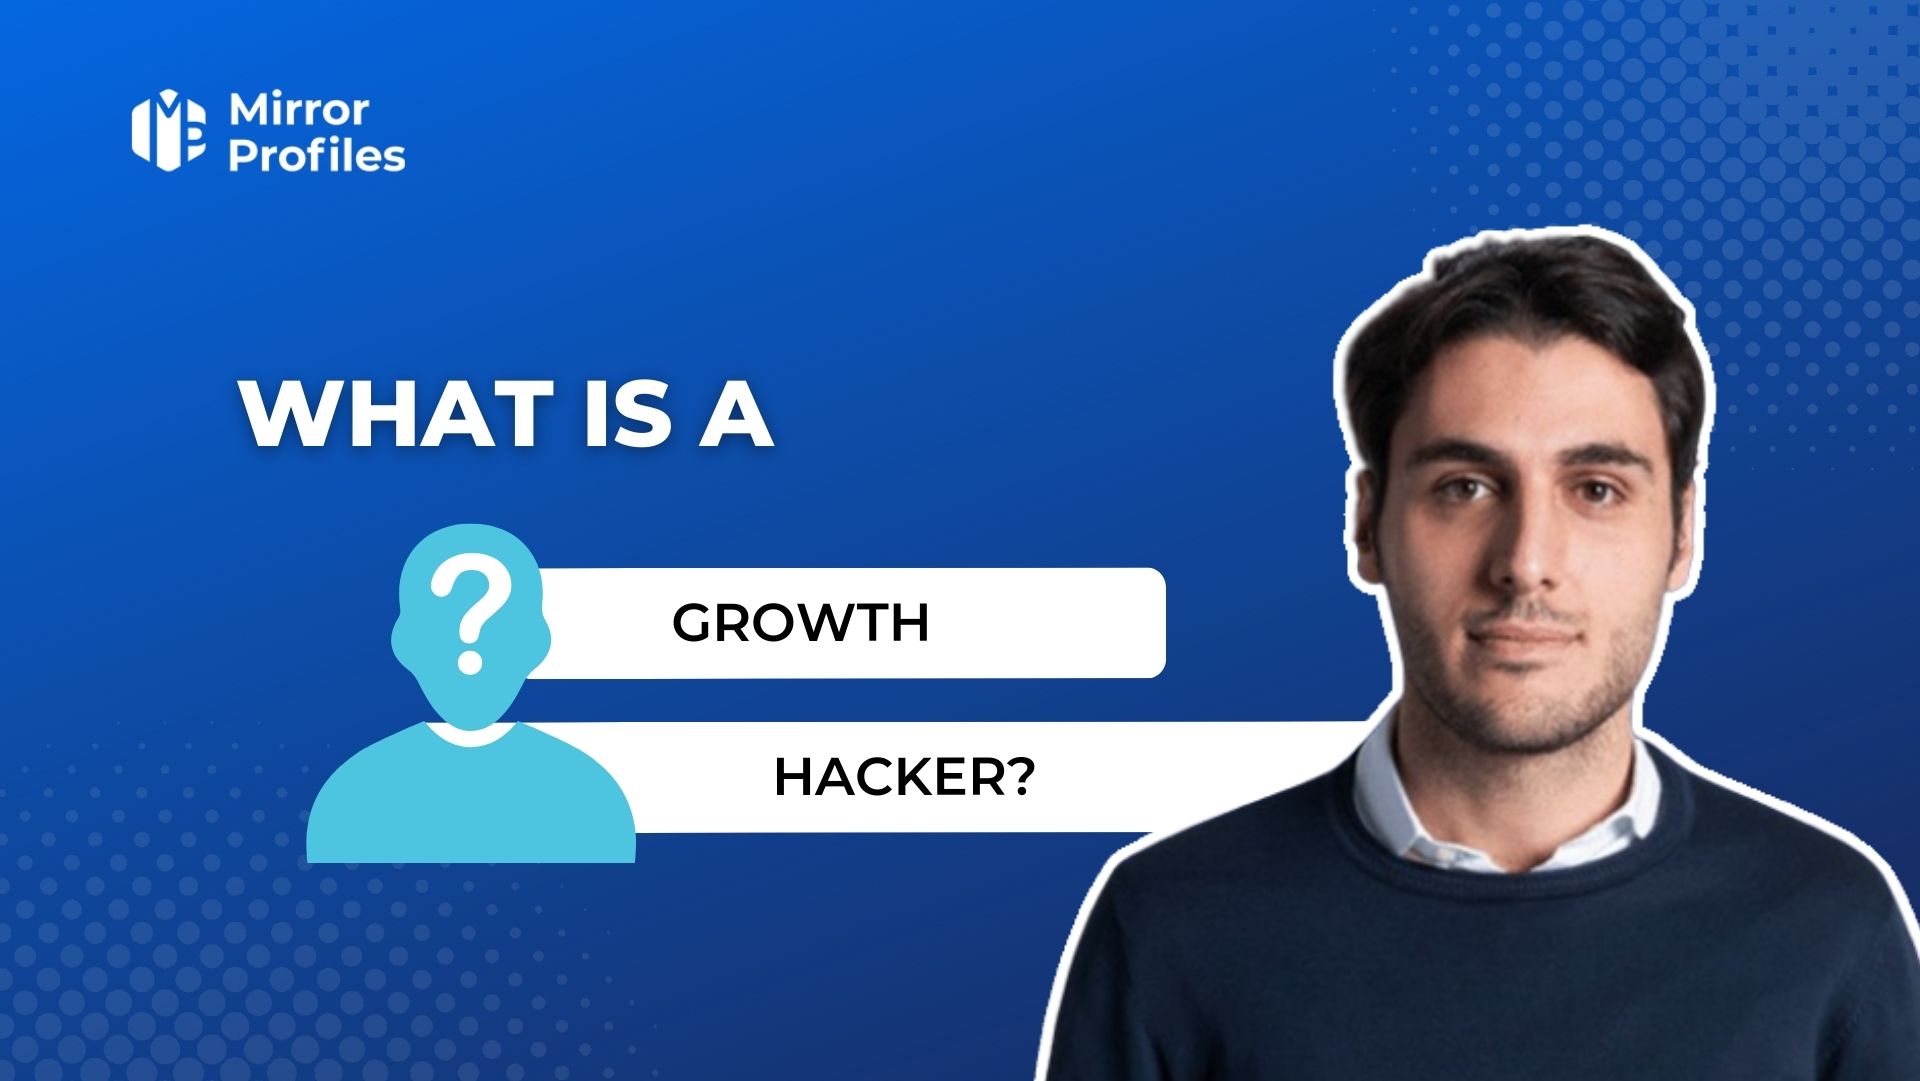 What is a Growth Haker?